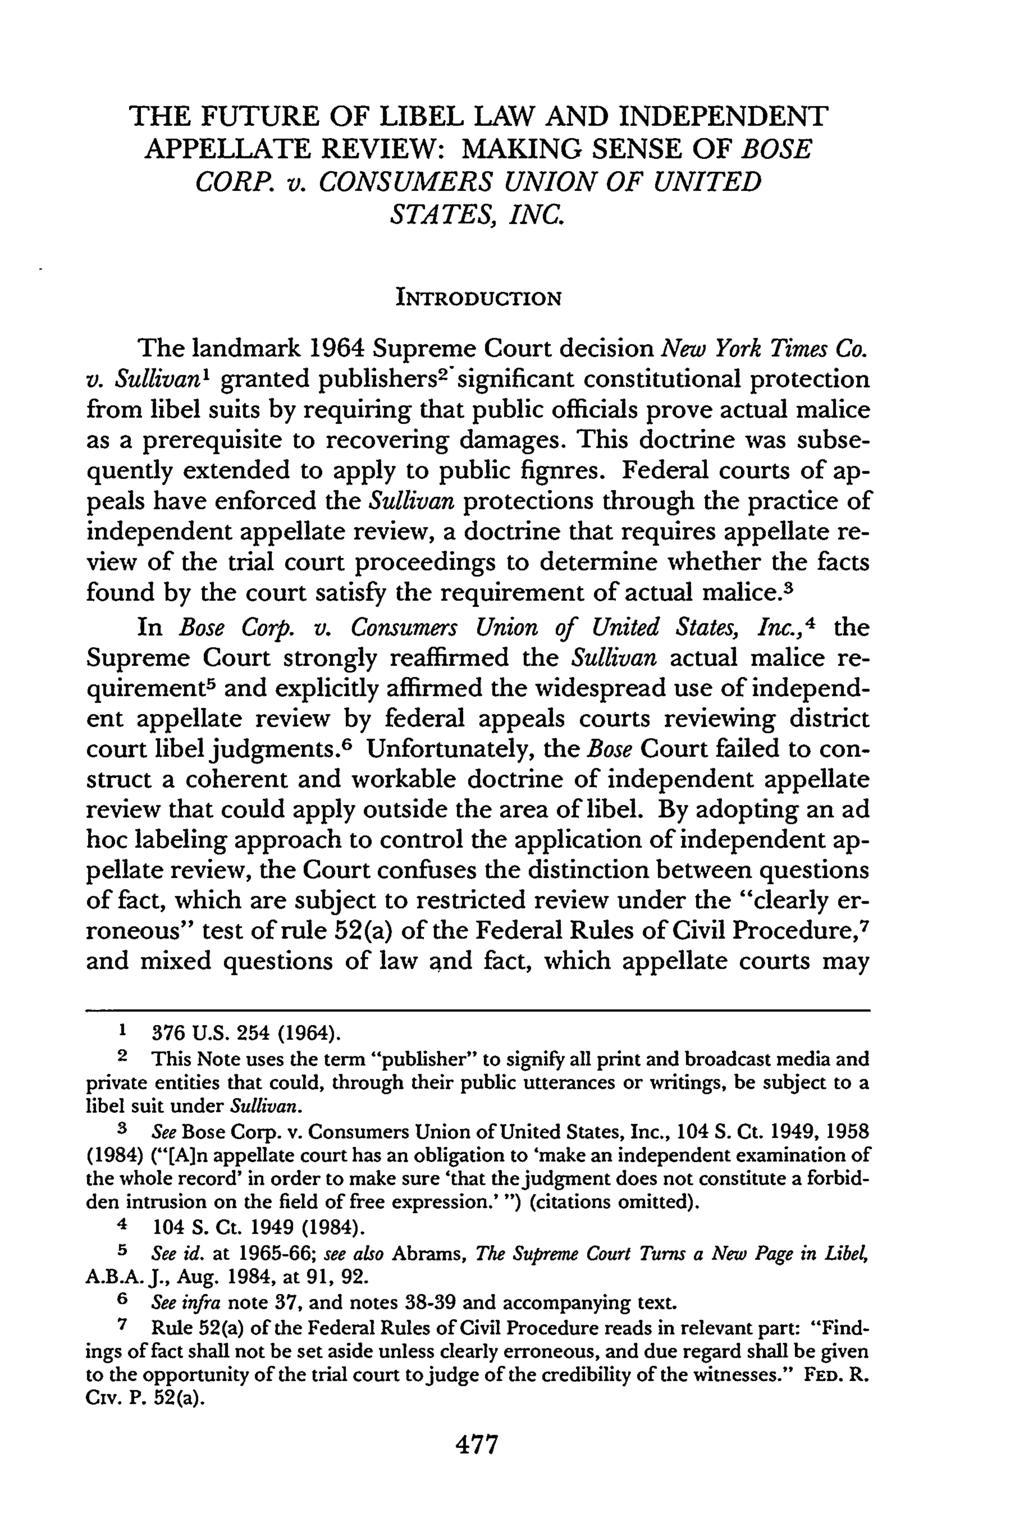 THE FUTURE OF LIBEL LAW AND INDEPENDENT APPELLATE REVIEW: MAKING SENSE OF BOSE CORP. v. CONSUMERS UNION OF UNITED STA TES, INC. INTRODUCTION The landmark 1964 Supreme Court decision New York Times Co.